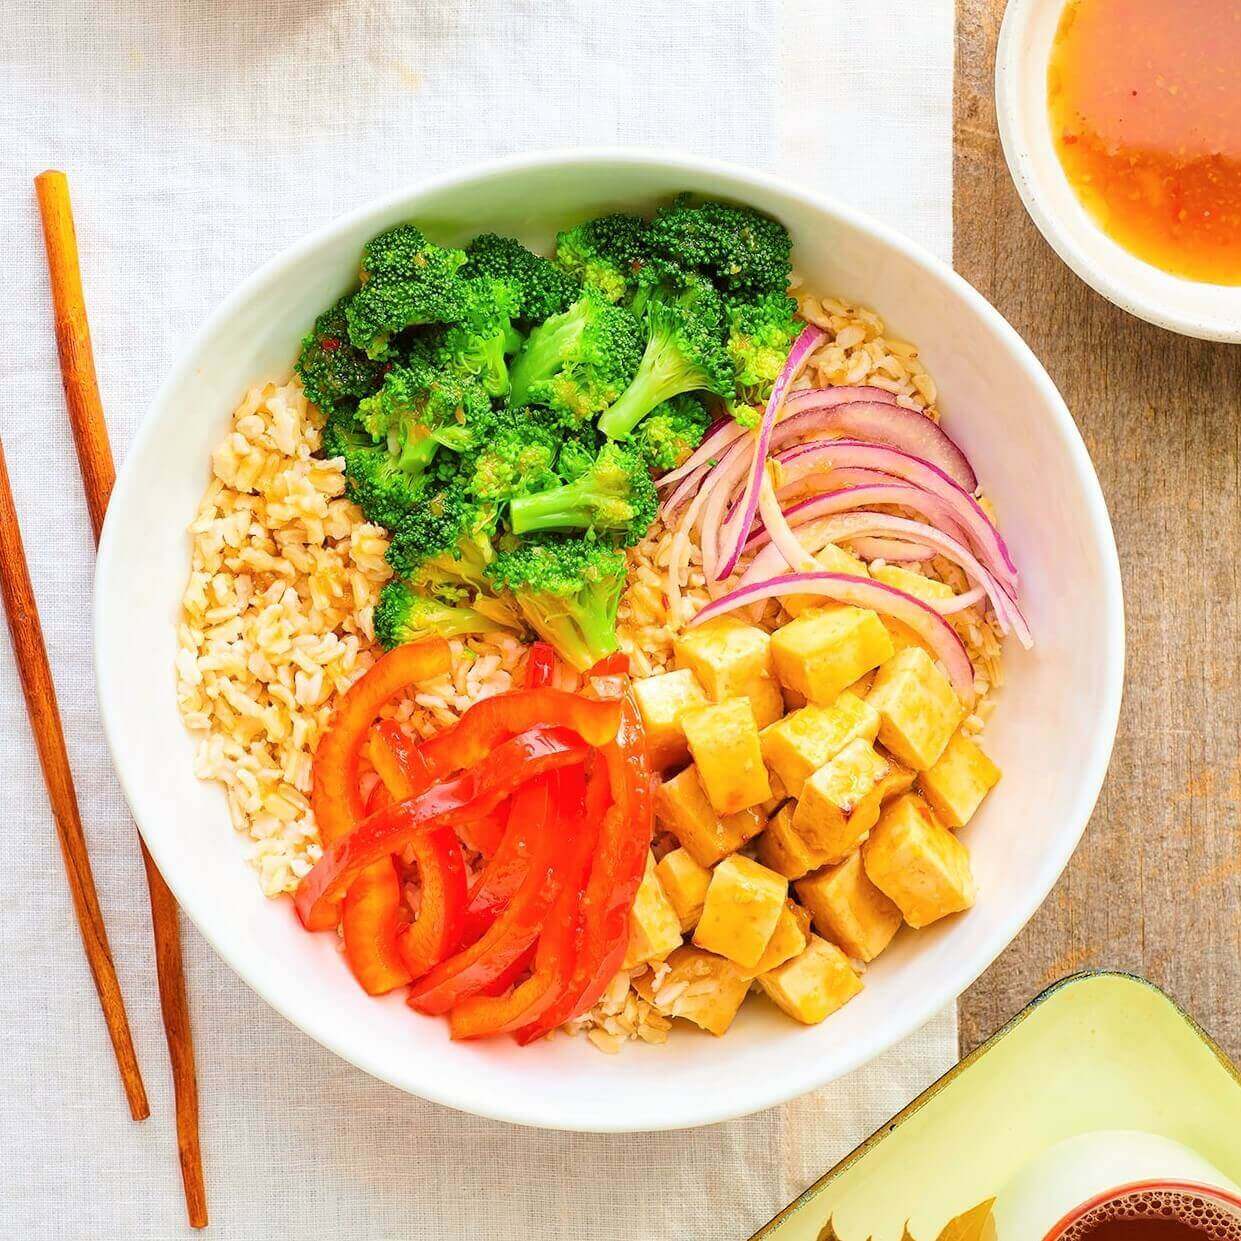 General Tsao's Tofu with Broccoli and Red Peppers